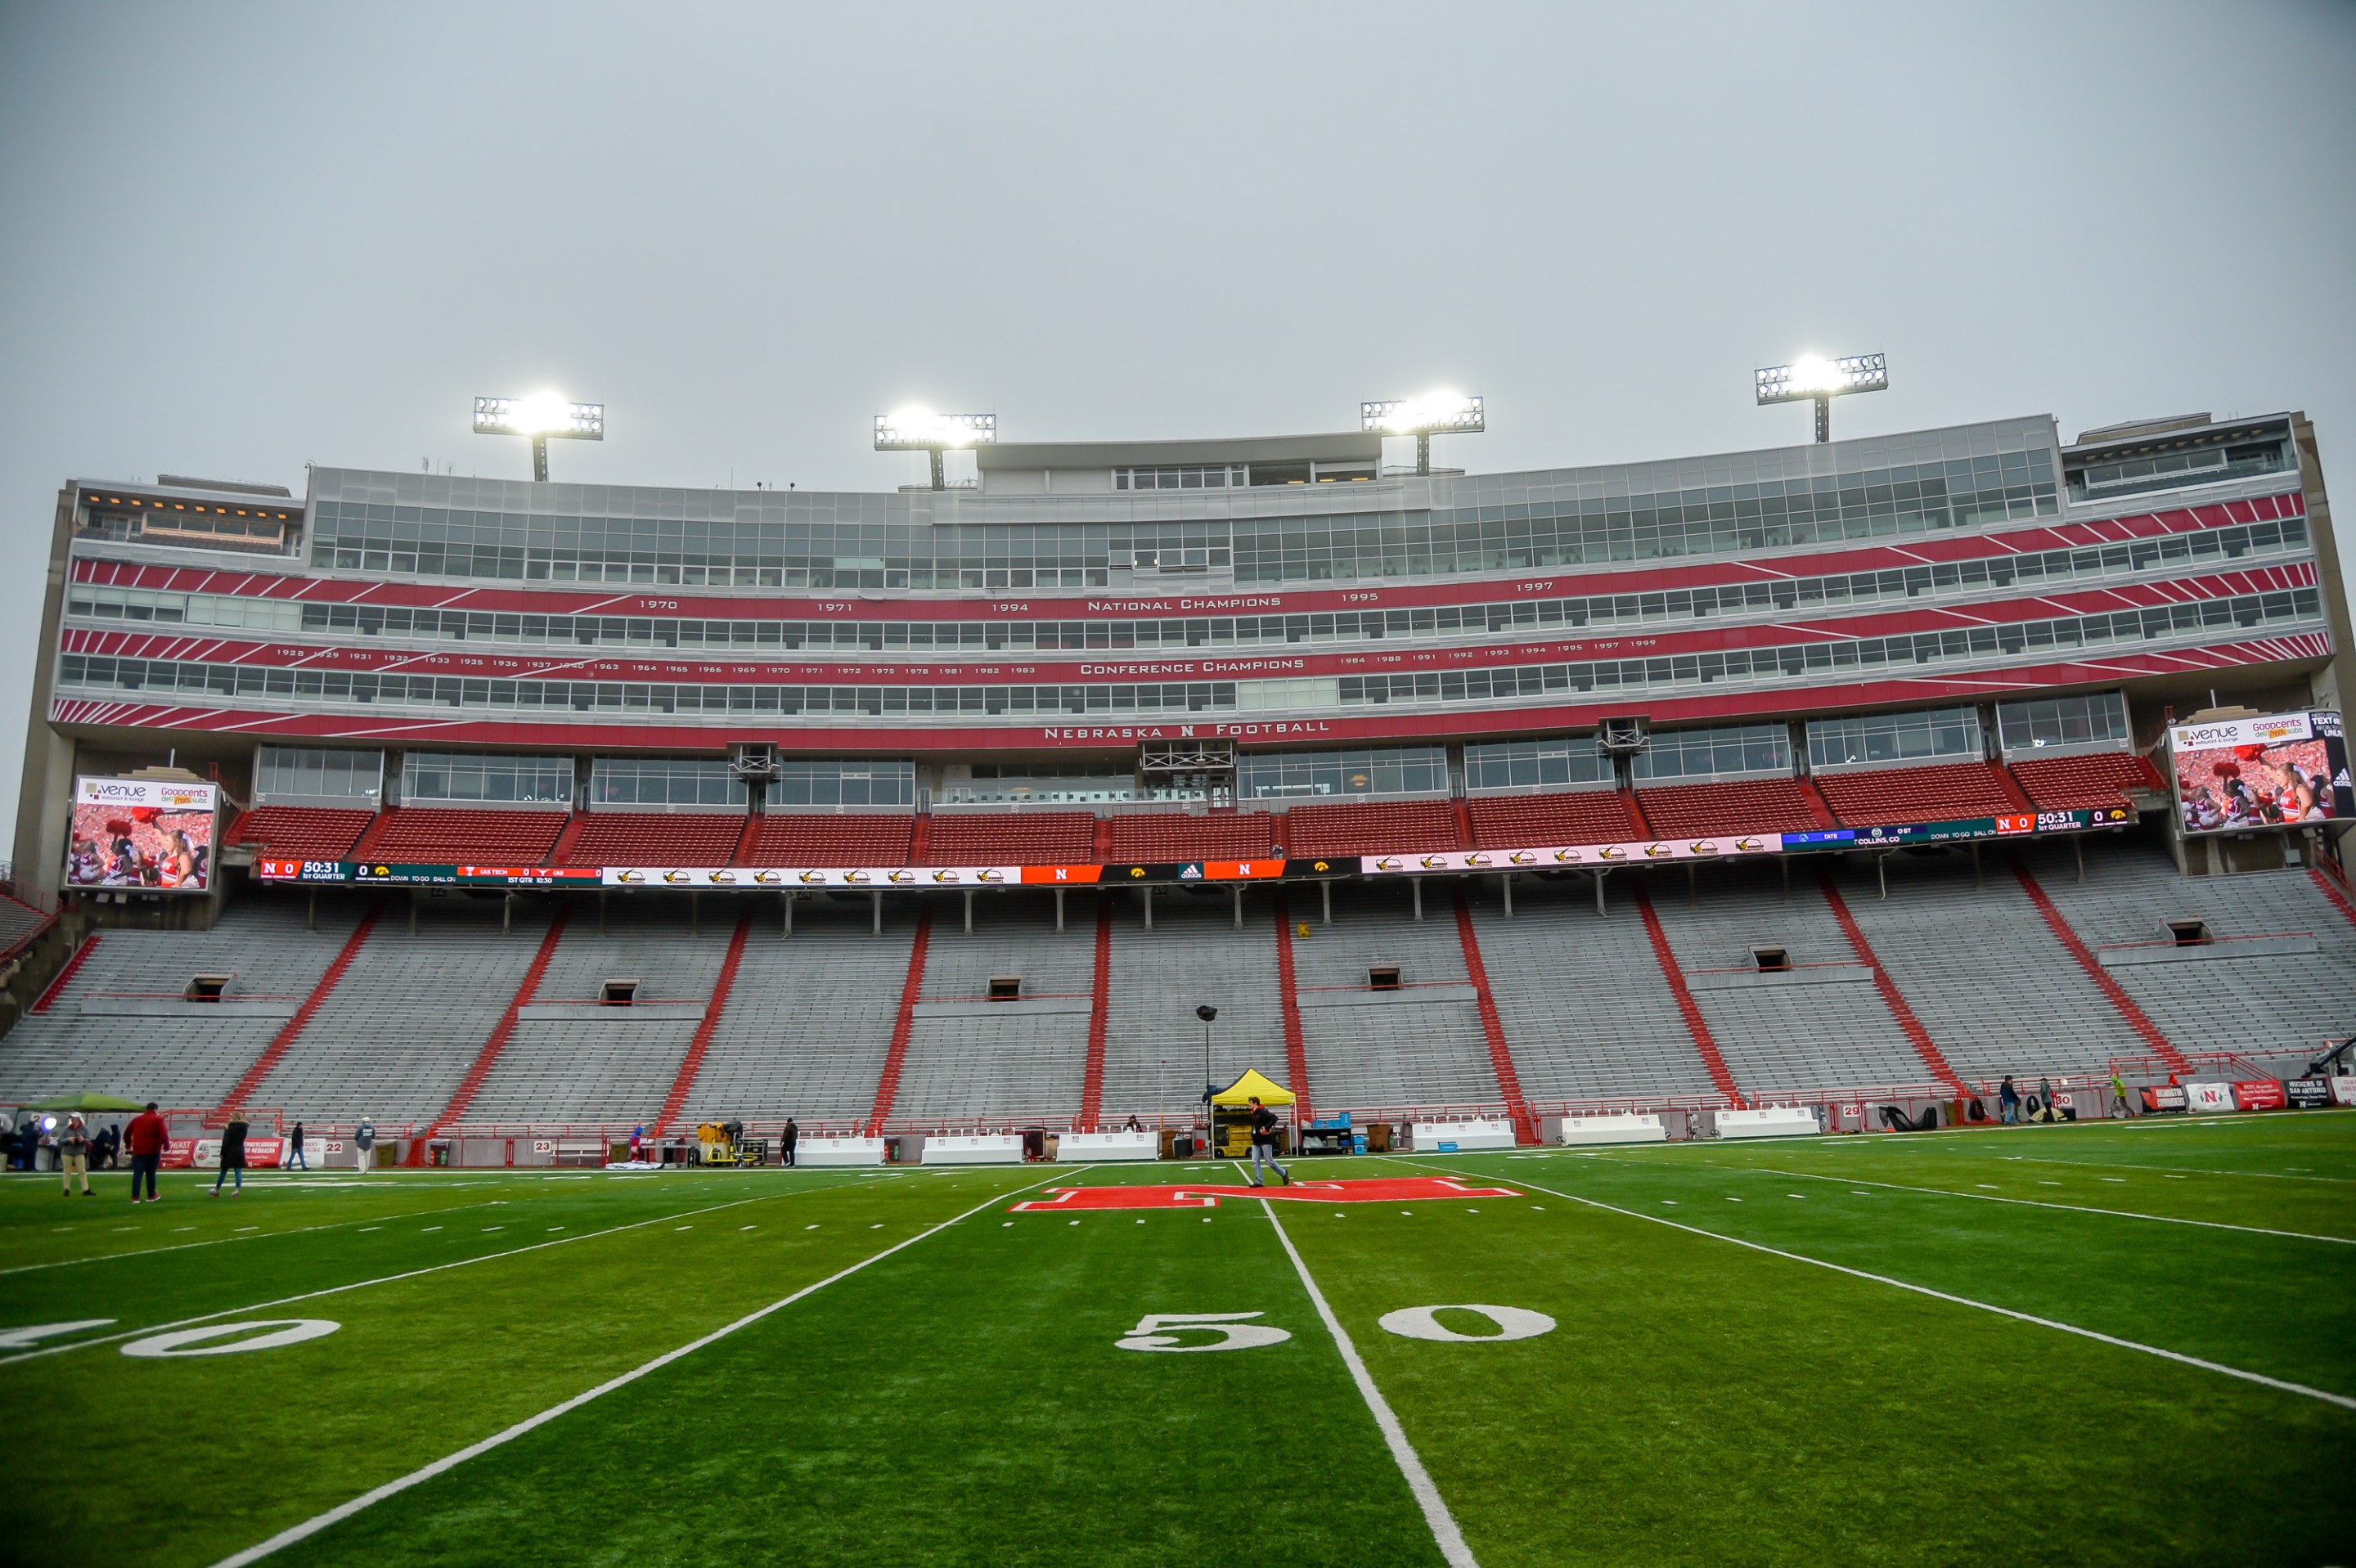 A sideline view of Nebraska's Memorial Stadium, where the Defector Idiots hope to achieve ultimate glory in the sport of college football